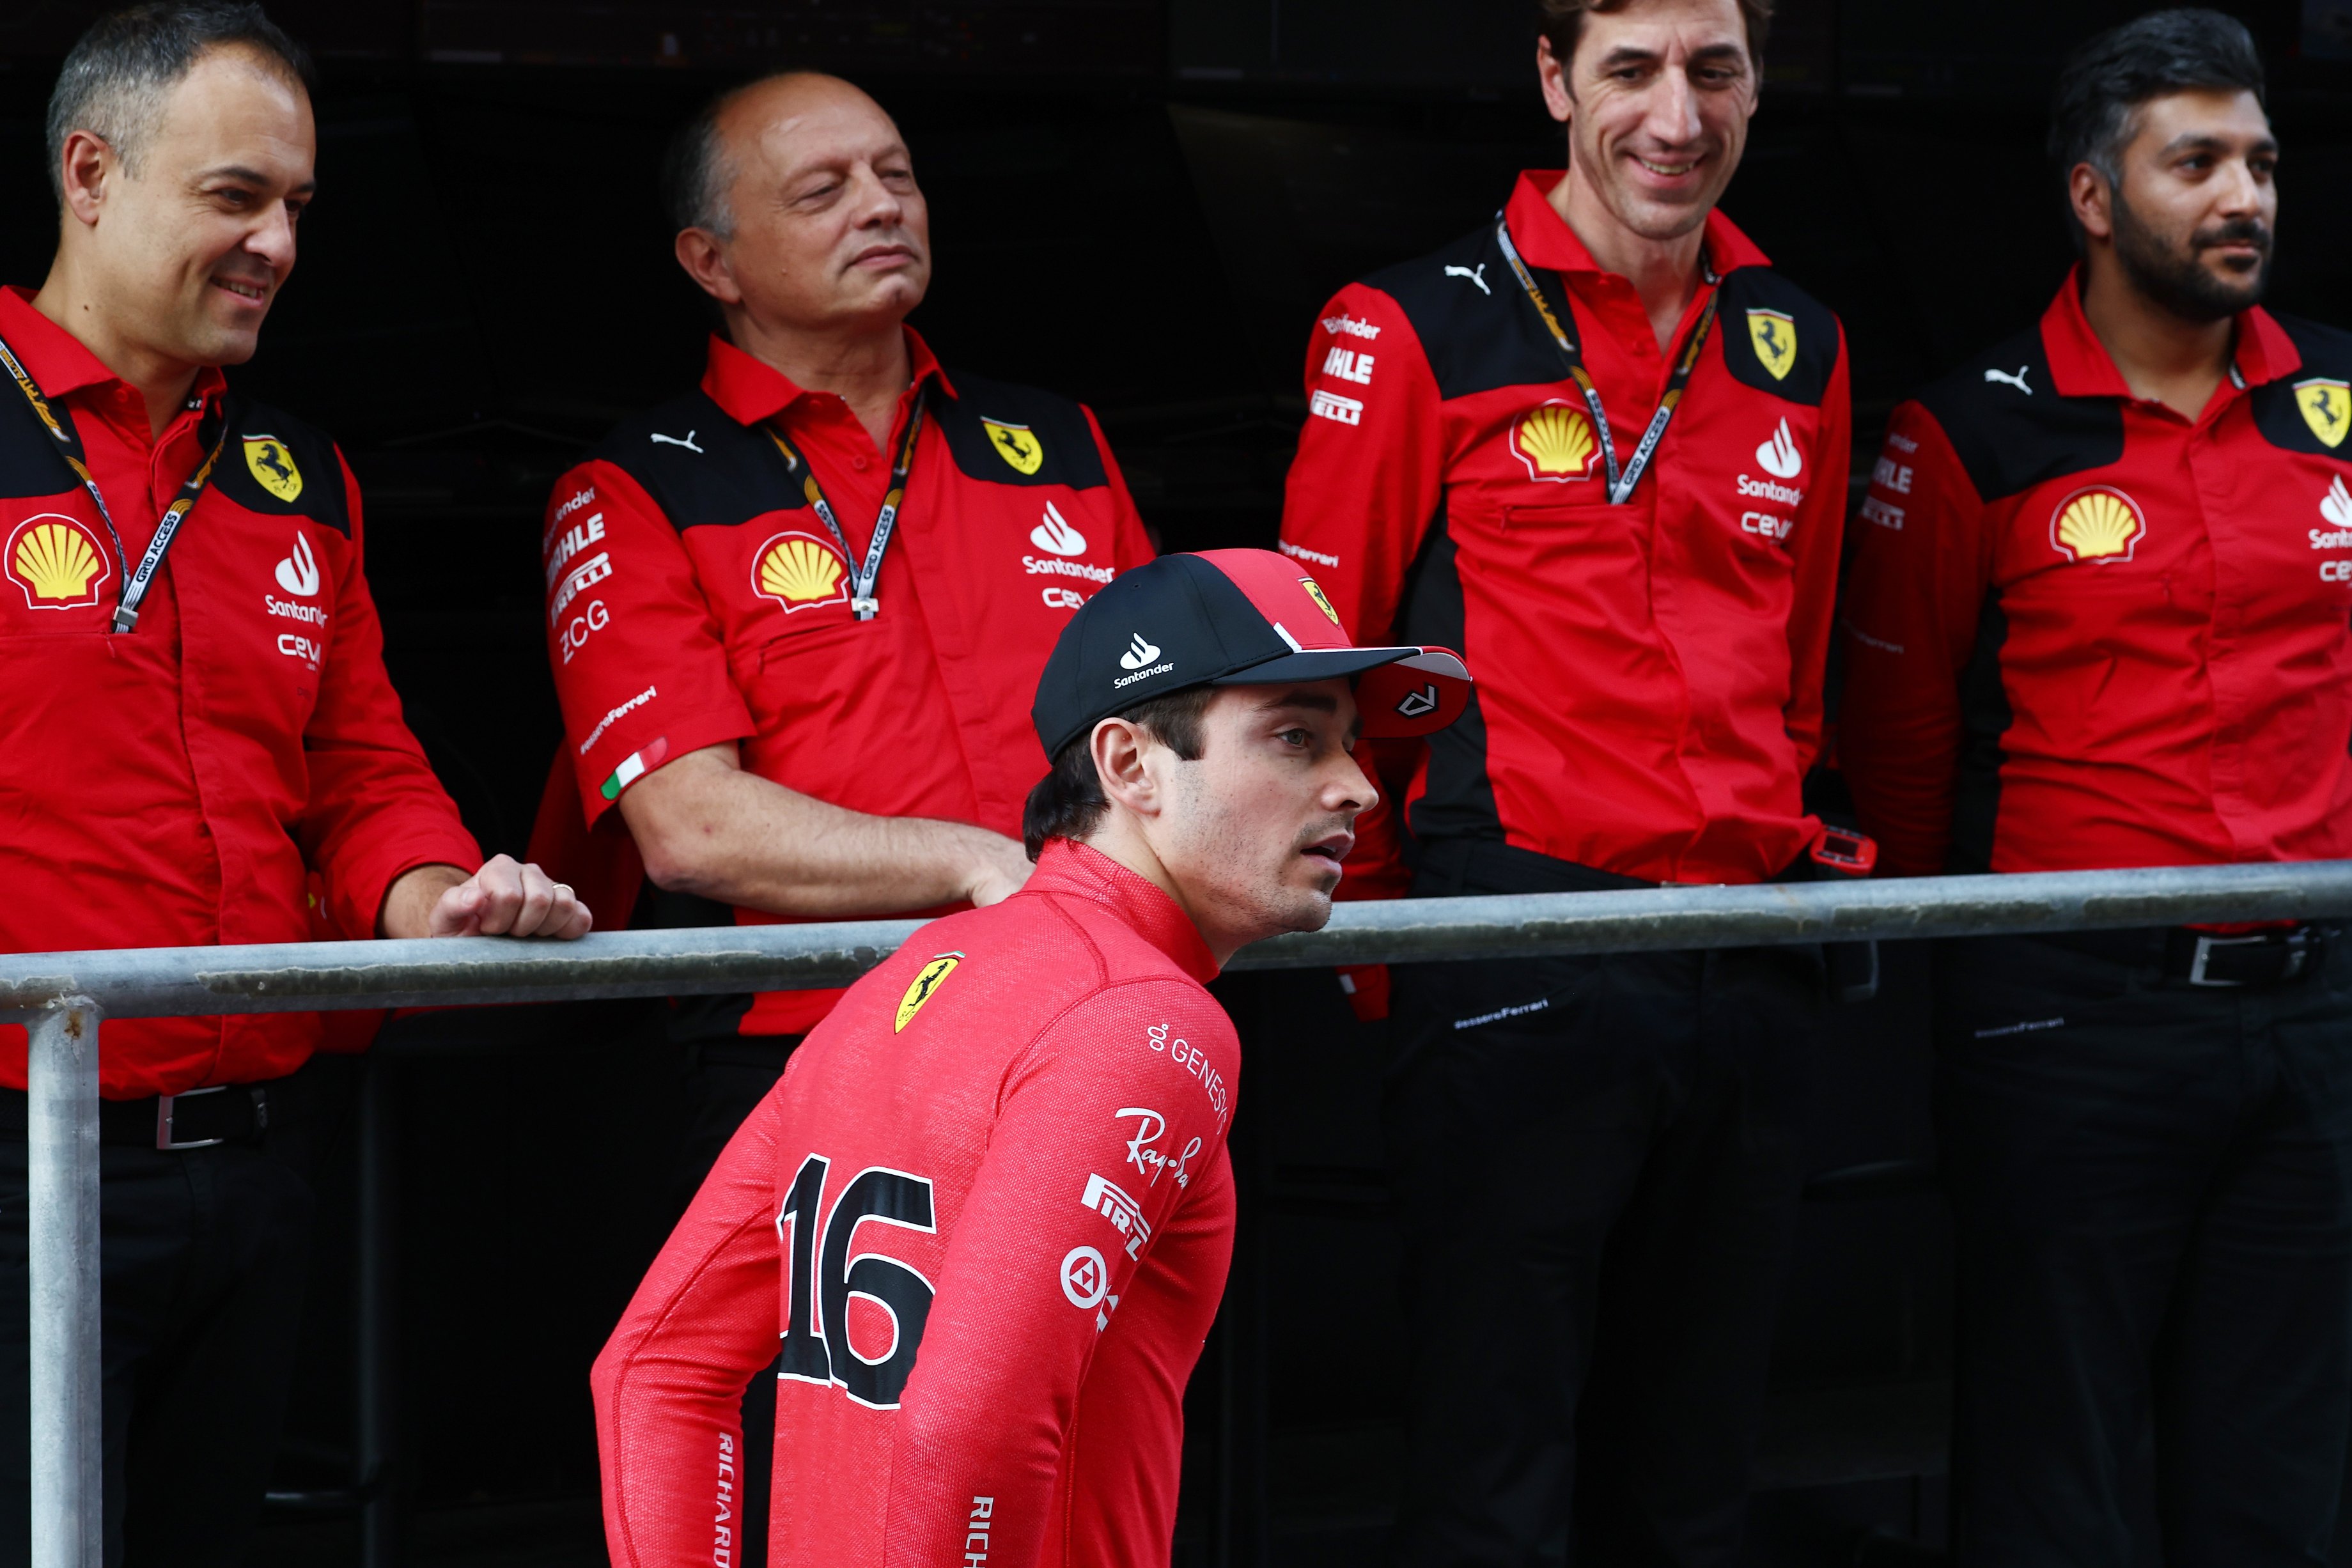 Charles Leclerc says Ferrari's 'dream start' to the season 'feels amazing'  after team's recent struggles